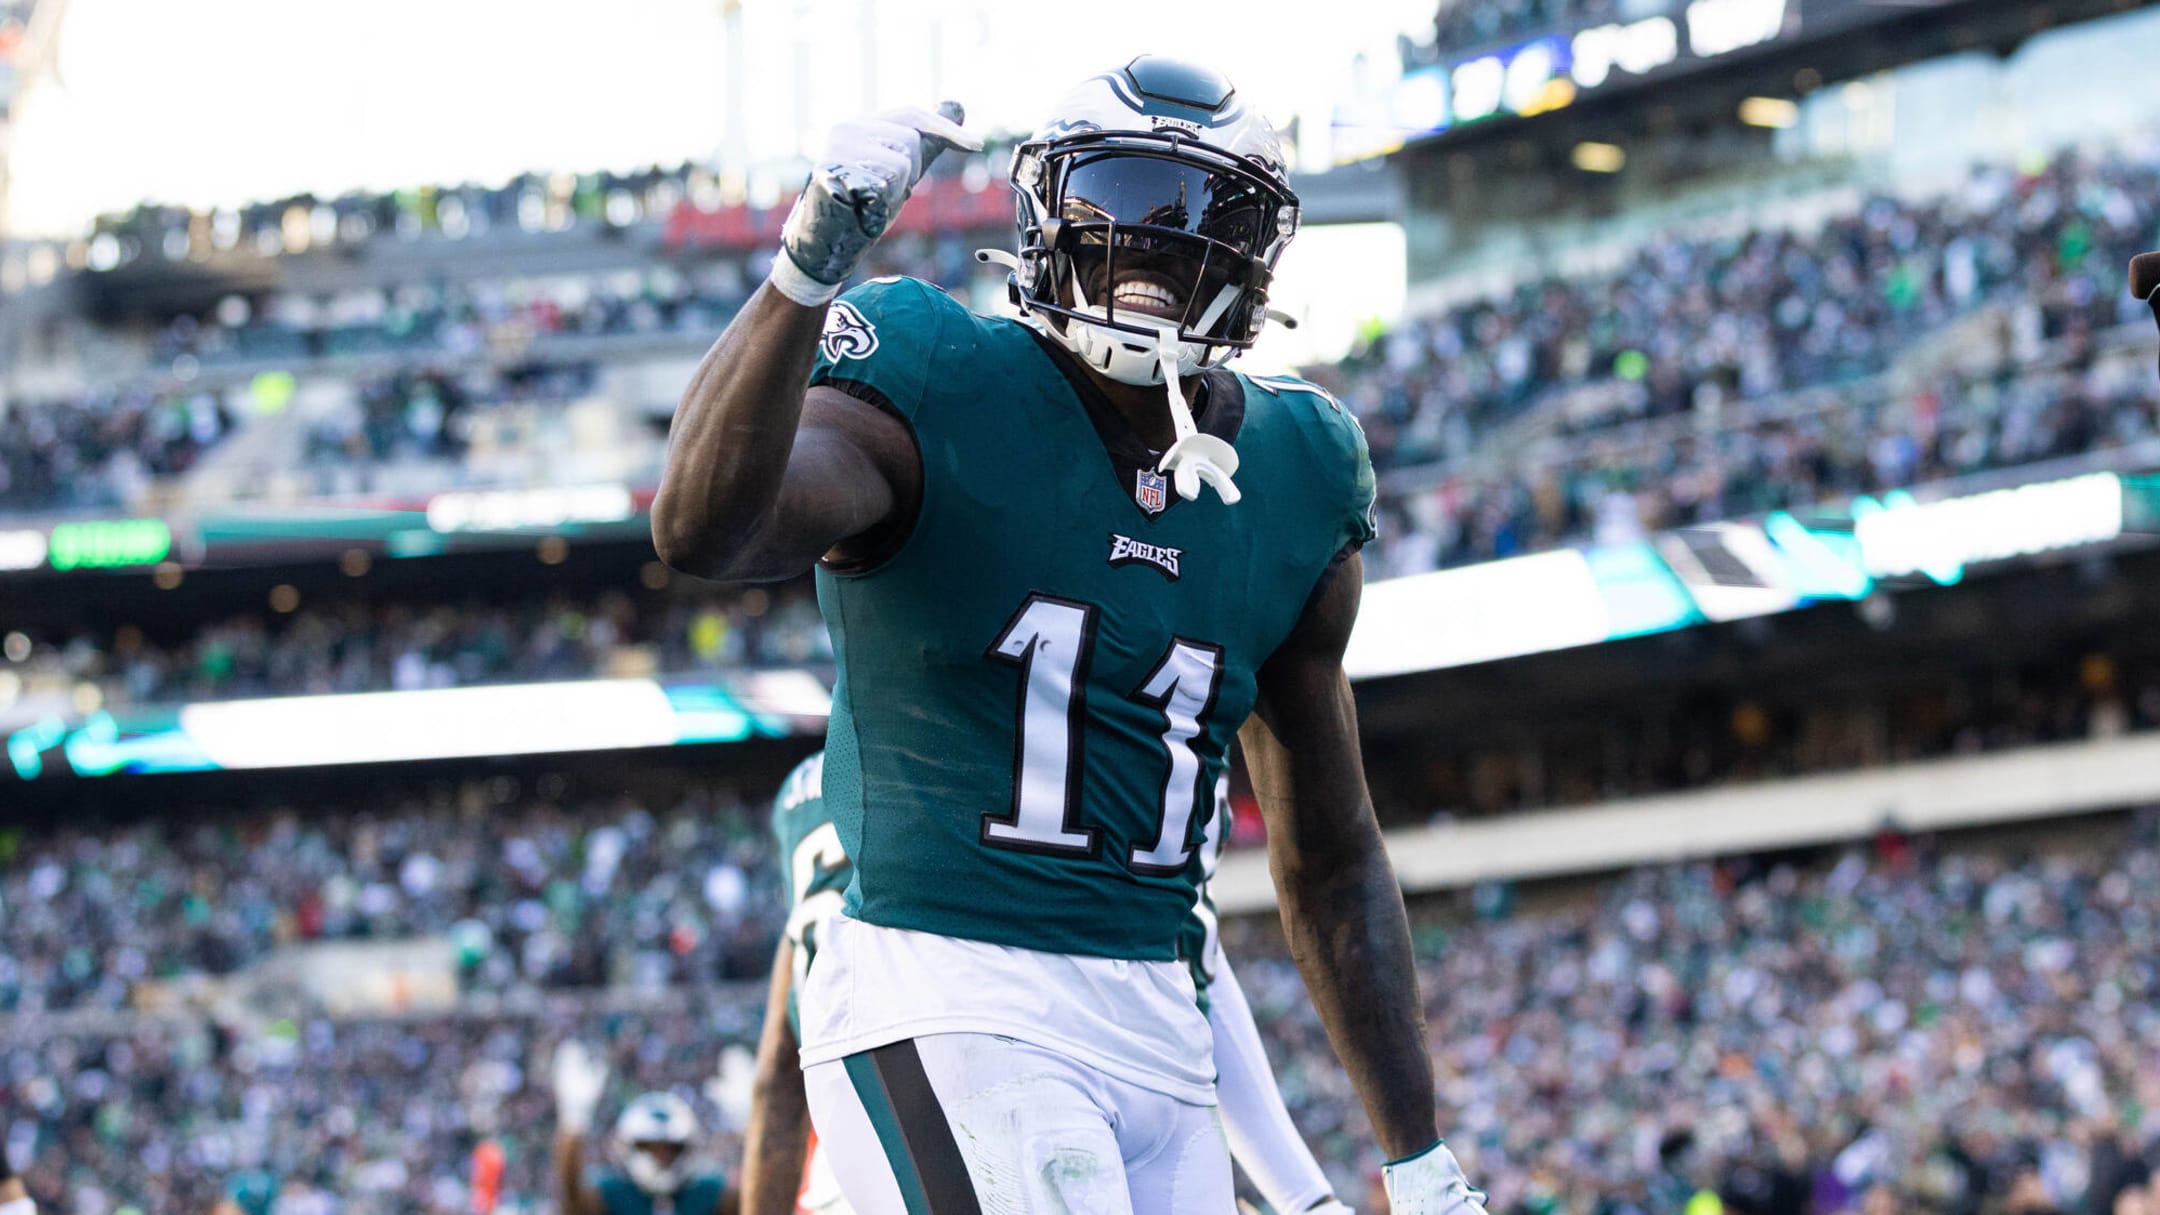 Eagles wide receiver A.J. Brown at peace with career following Titans trade